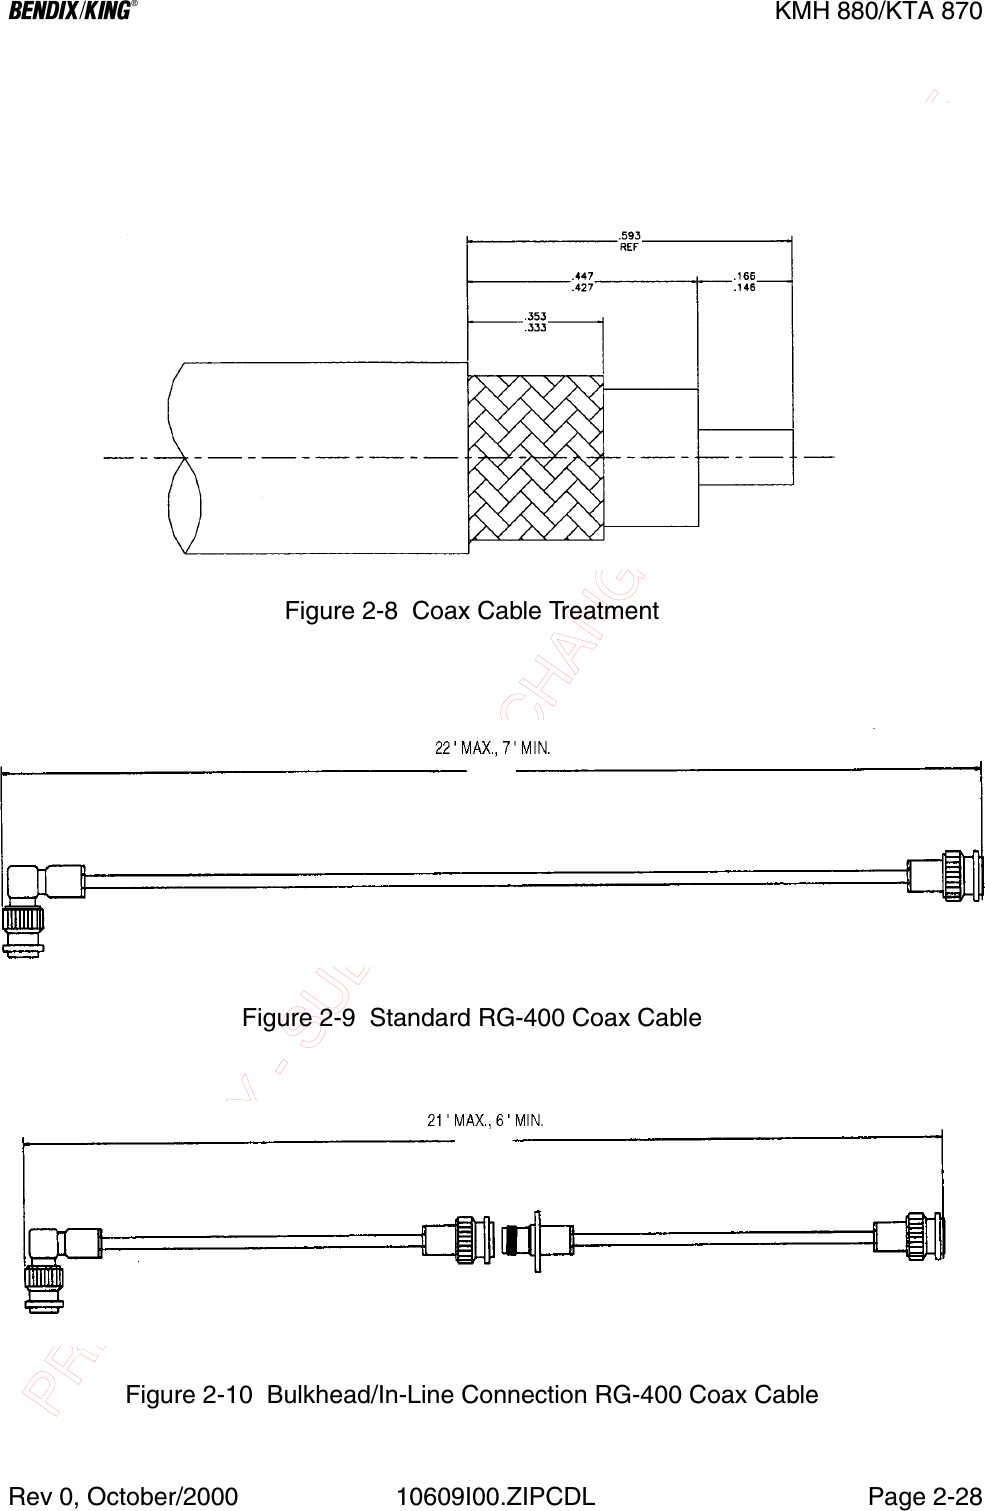 PRELIMINARY - SUBJECT TO CHANGE WITHOUT NOTICEBKMH 880/KTA 870Rev 0, October/2000 10609I00.ZIPCDL Page 2-28Figure 2-8  Coax Cable TreatmentFigure 2-9  Standard RG-400 Coax CableFigure 2-10  Bulkhead/In-Line Connection RG-400 Coax Cable